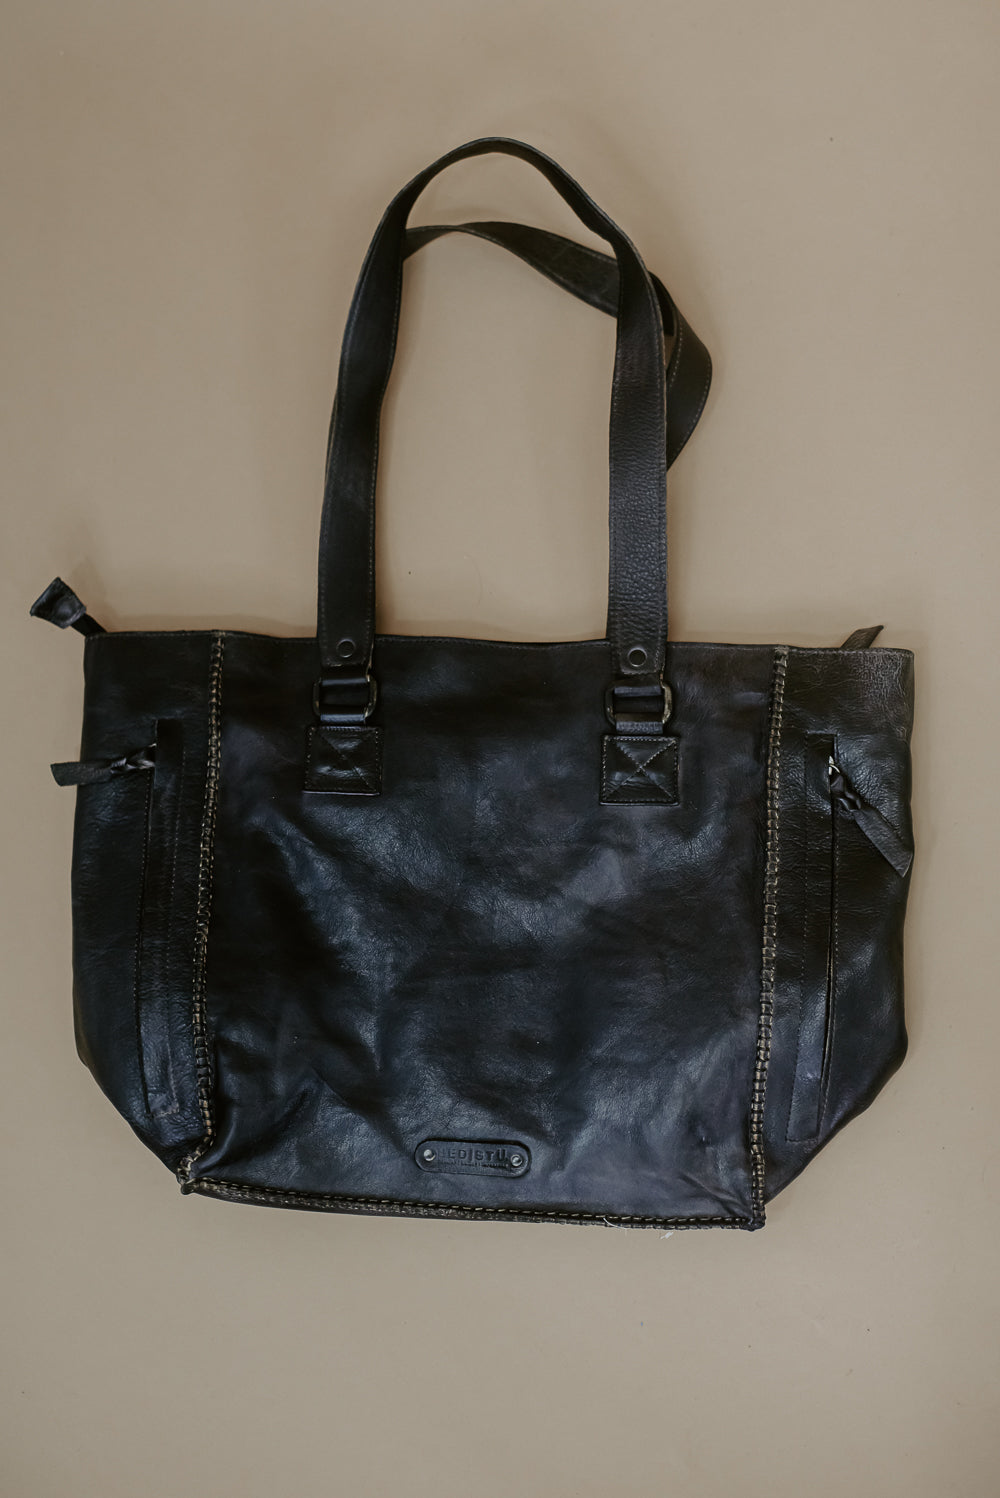 Genuine Leather Bee Bag, Women's Boutique